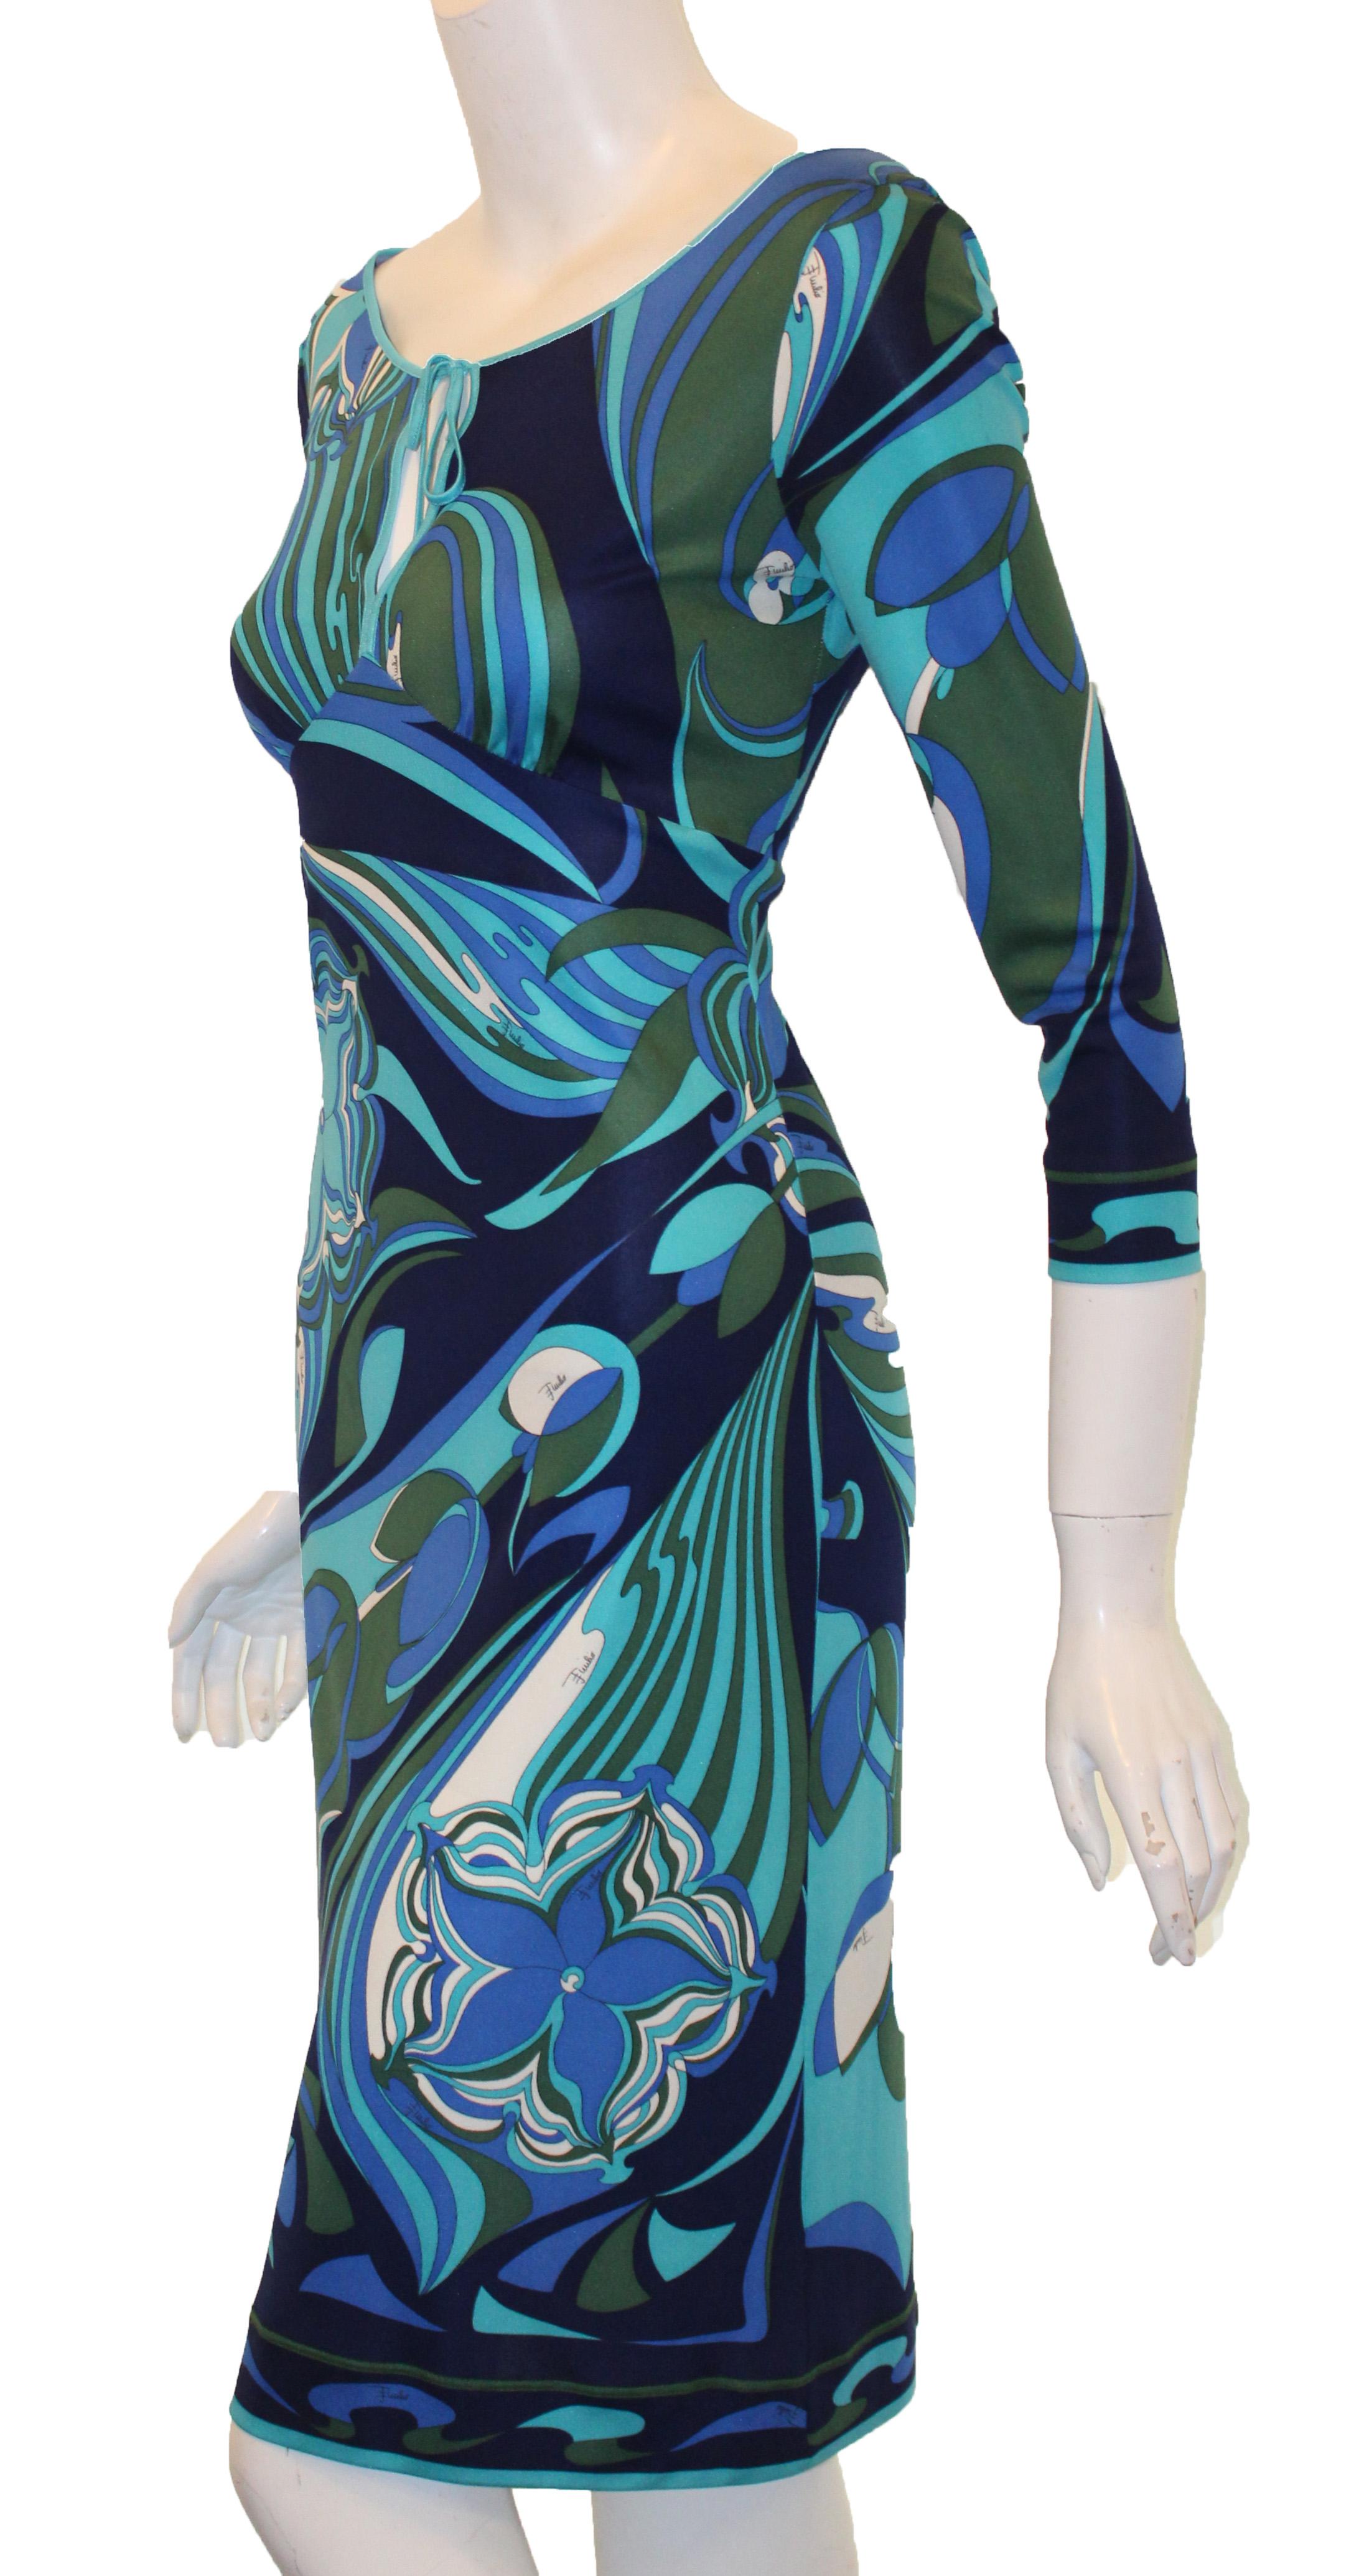 Emilio Pucci multi blue tones, boat collar dress includes a peek a boo opening at front.  This empire waist with 3/4 sleeves dress on an indefinable floral print is not lined.  The hem this garment contains a band trim of same fabric colors for